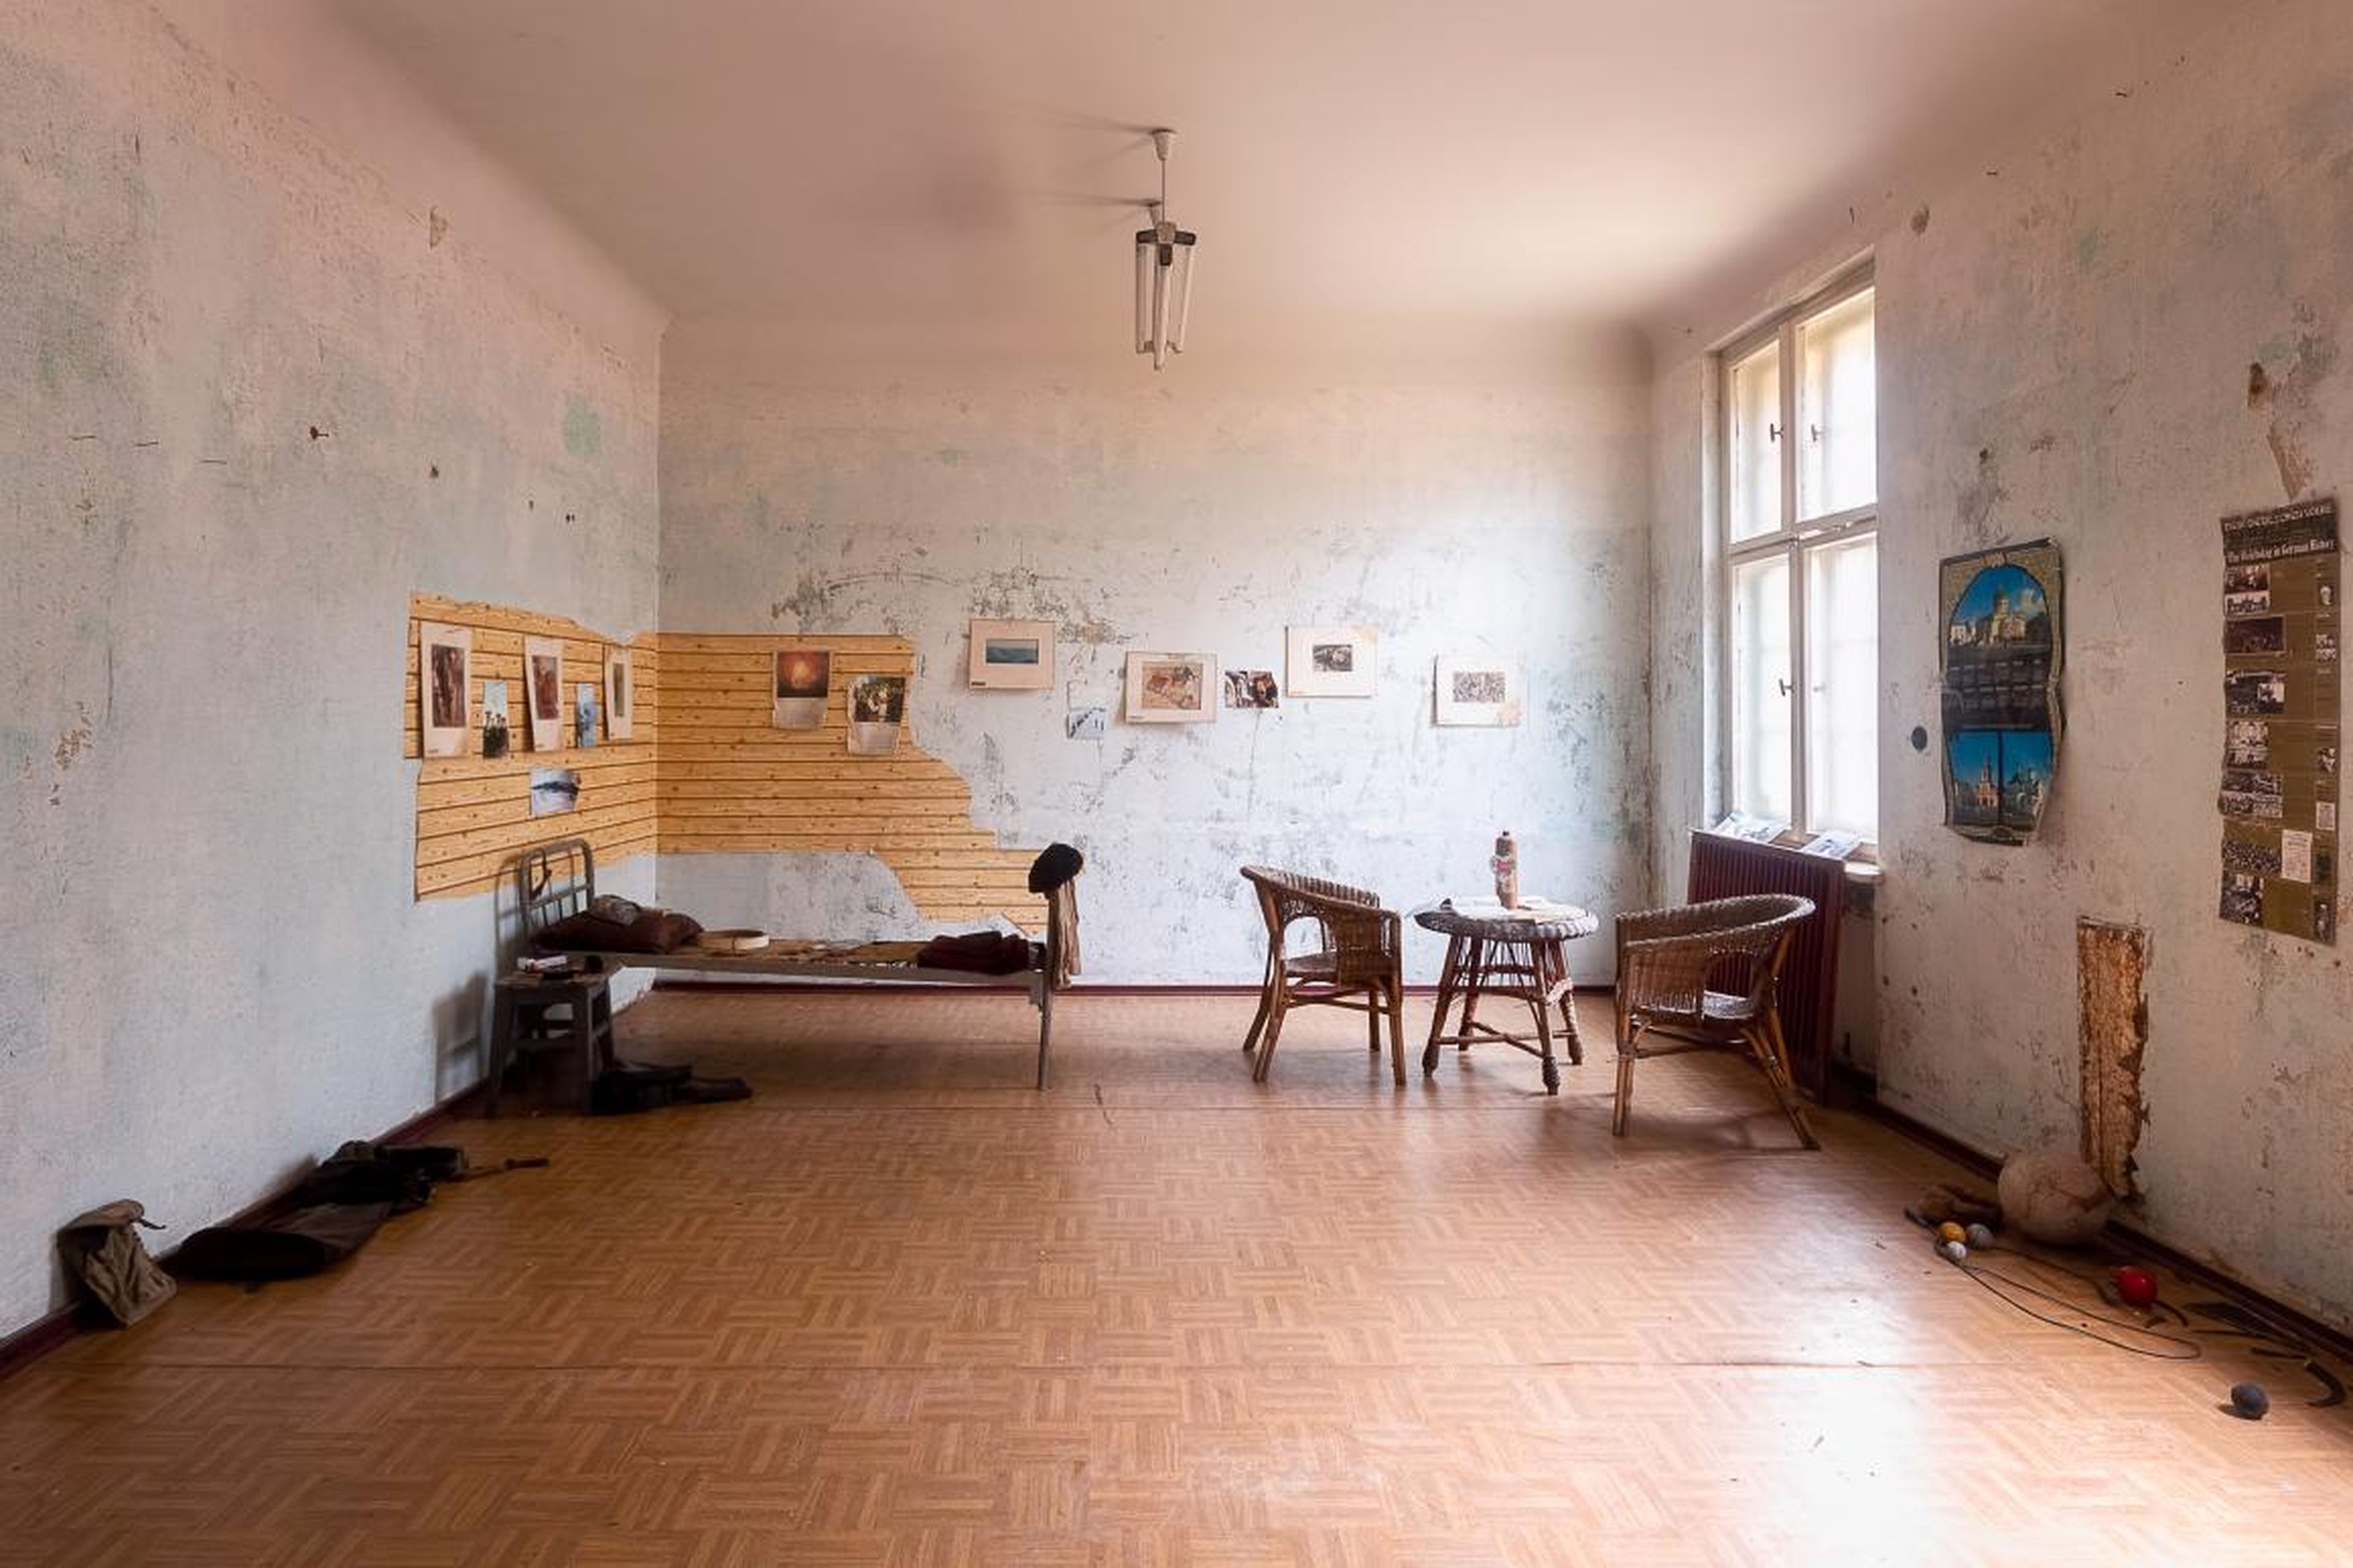 Rooms like this were used by some of the 40,000 Soviet soldiers that lived in the Forbidden City.